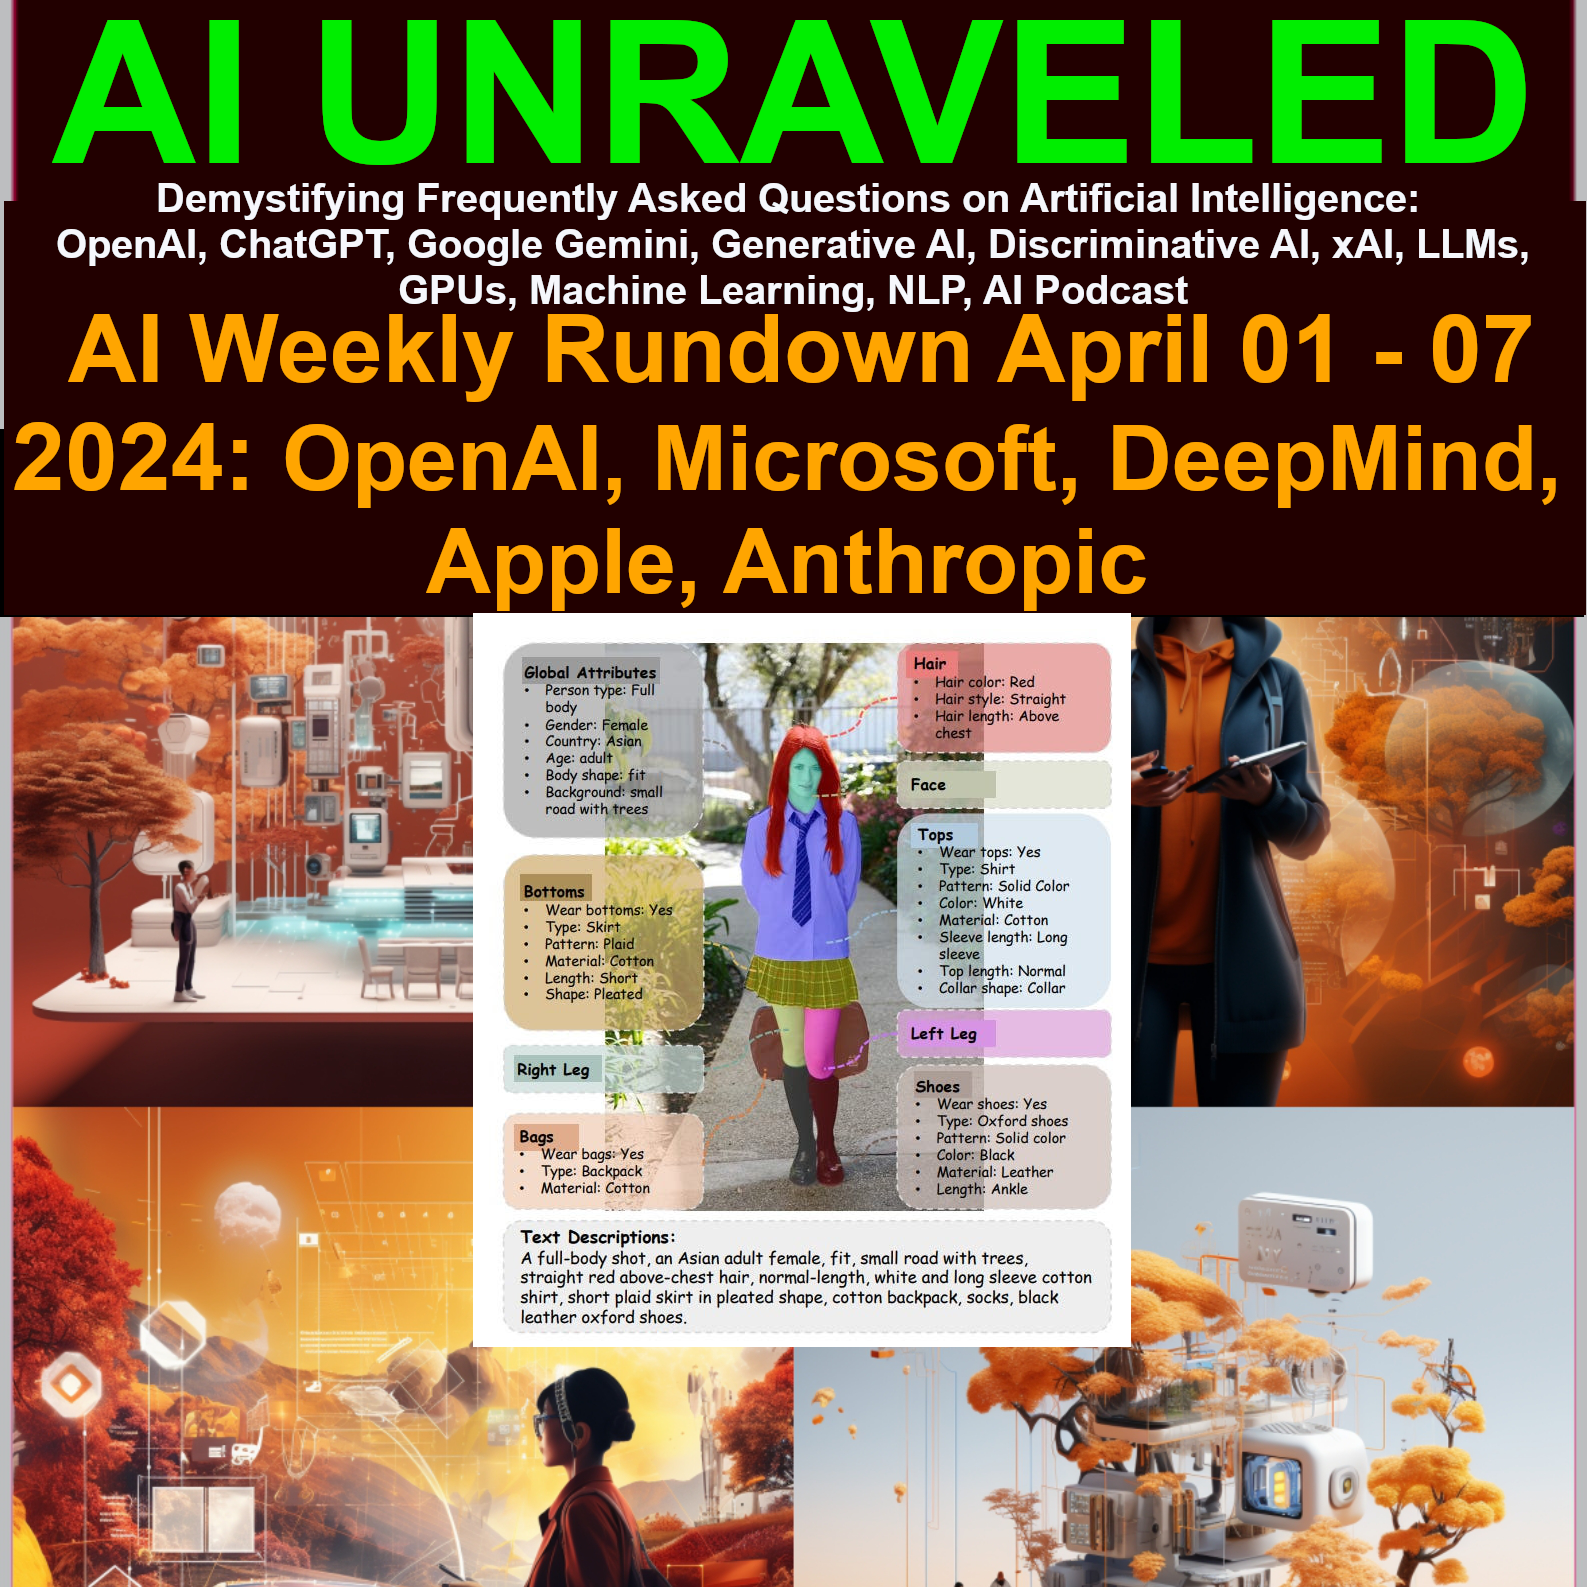 Weekly Rundown (April 01st to April 08th 2024) Major AI breaking news from OpenAI, Microsoft, DeepMind, Apple, Anthropic, and more